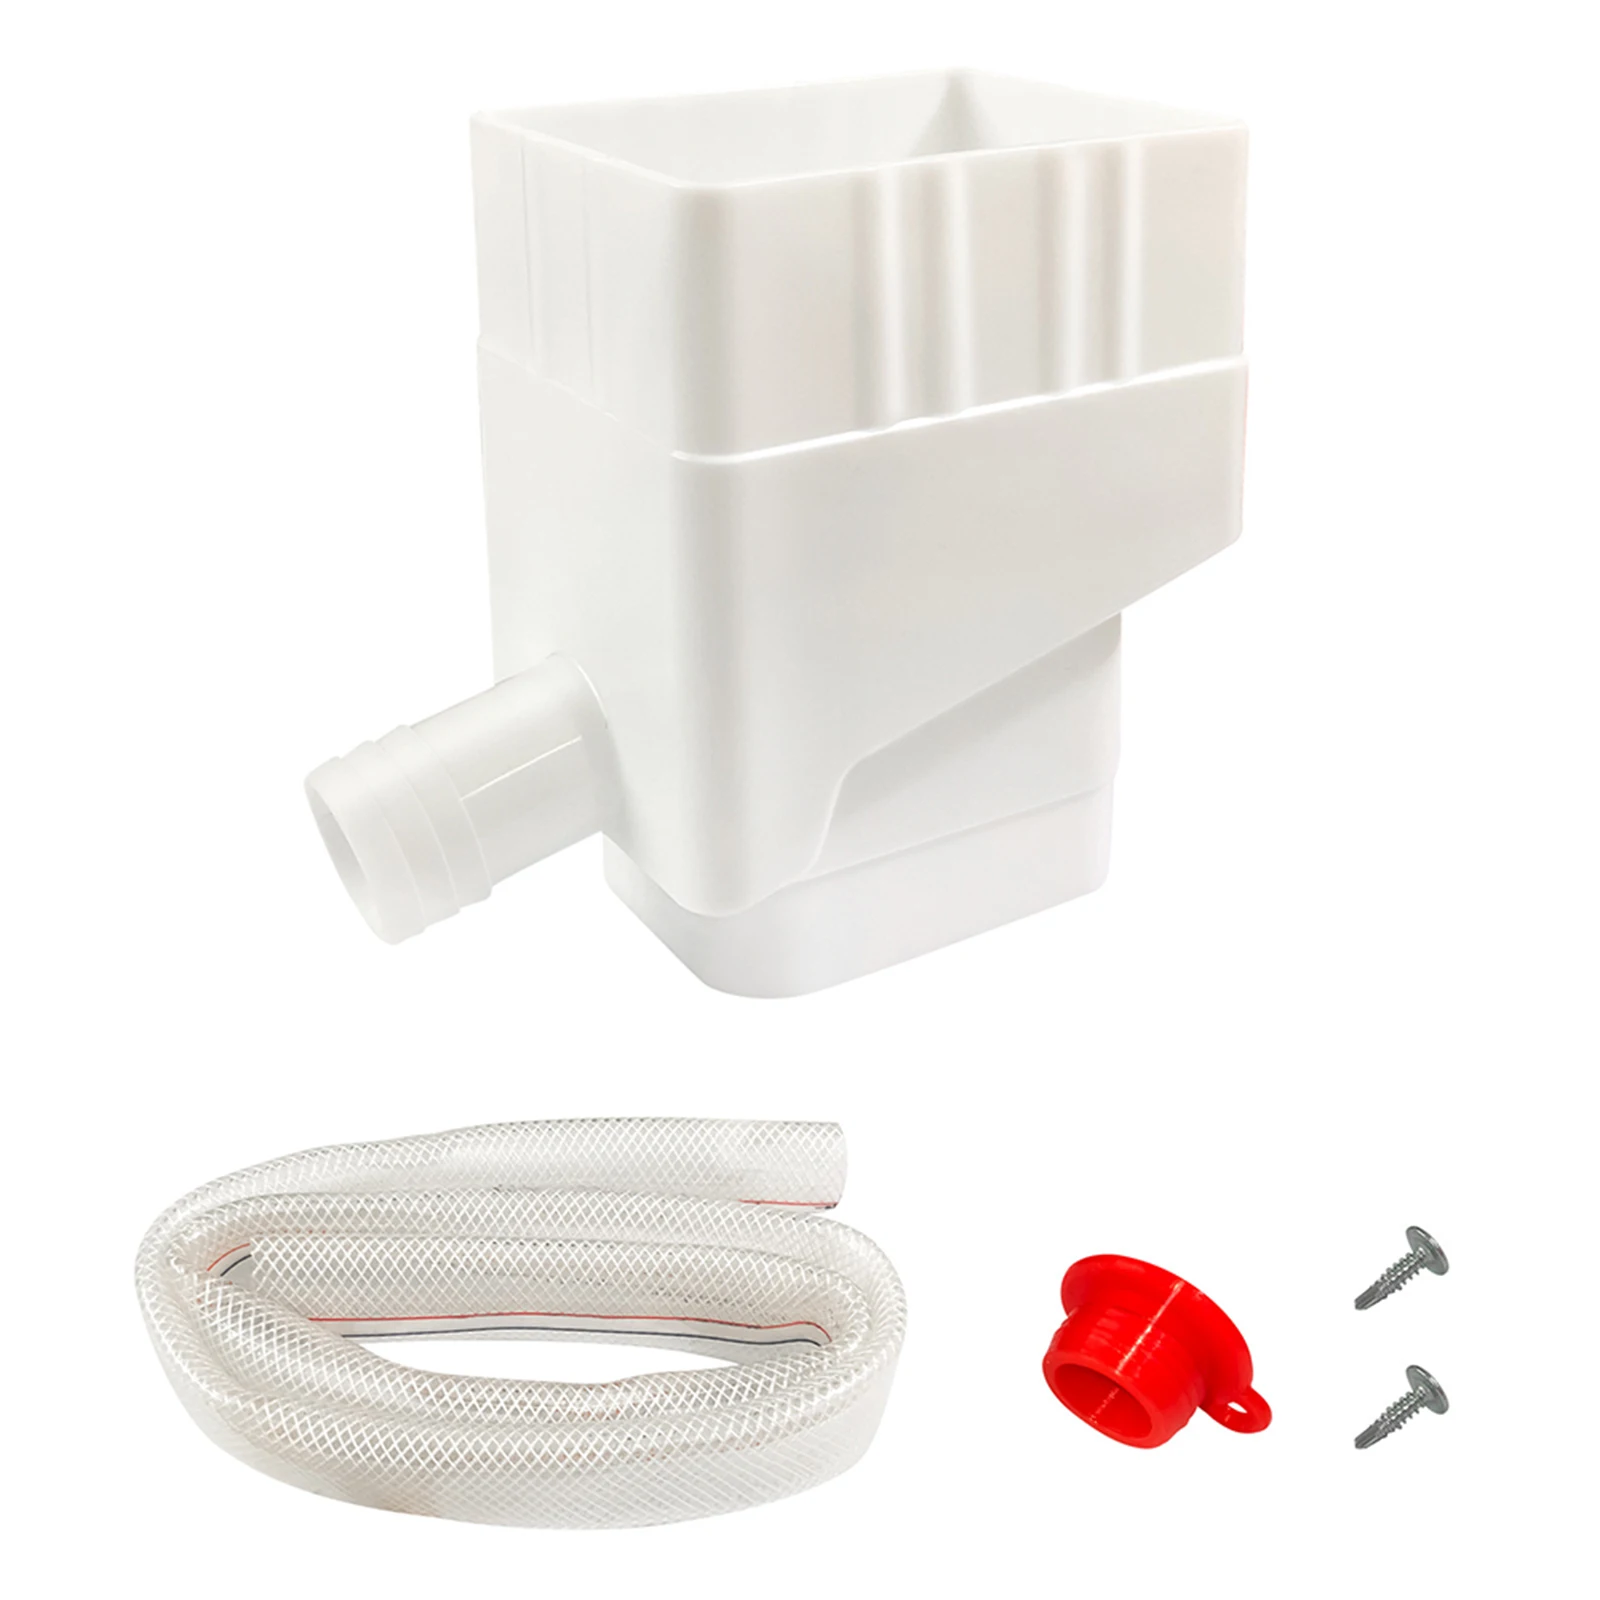 New Water Houseplants Gardens Main Body Red Silicone Plug With 40in Hose Diverter Connector Downspout Water Main Body